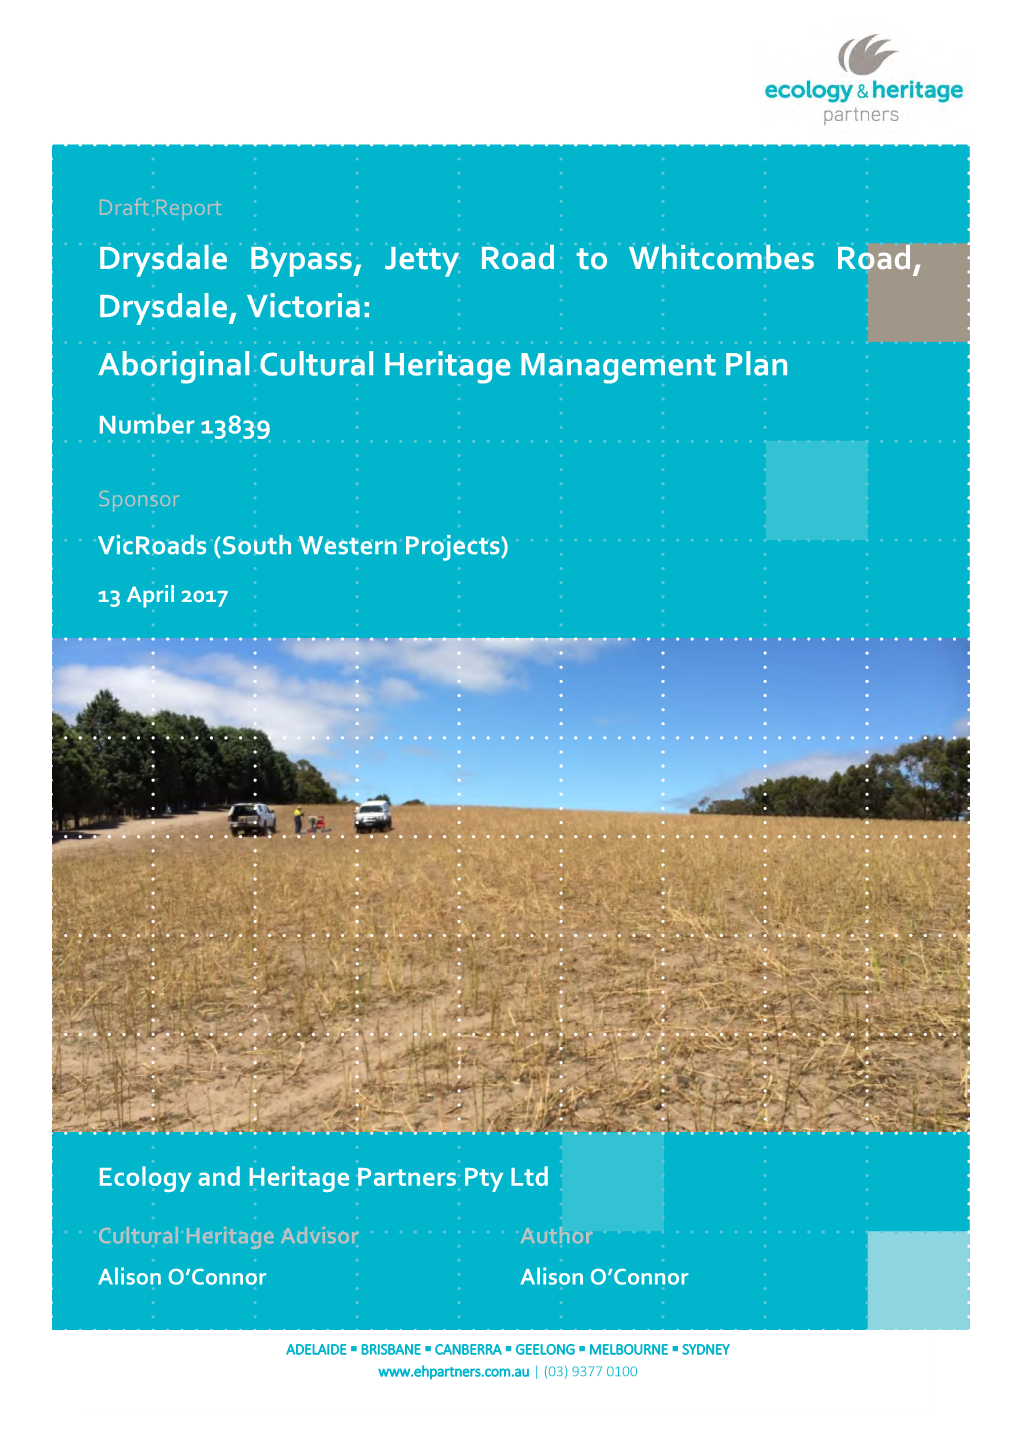 Drysdale Bypass, Jetty Road to Whitcombes Road, Drysdale, Victoria: Aboriginal Cultural Heritage Management Plan